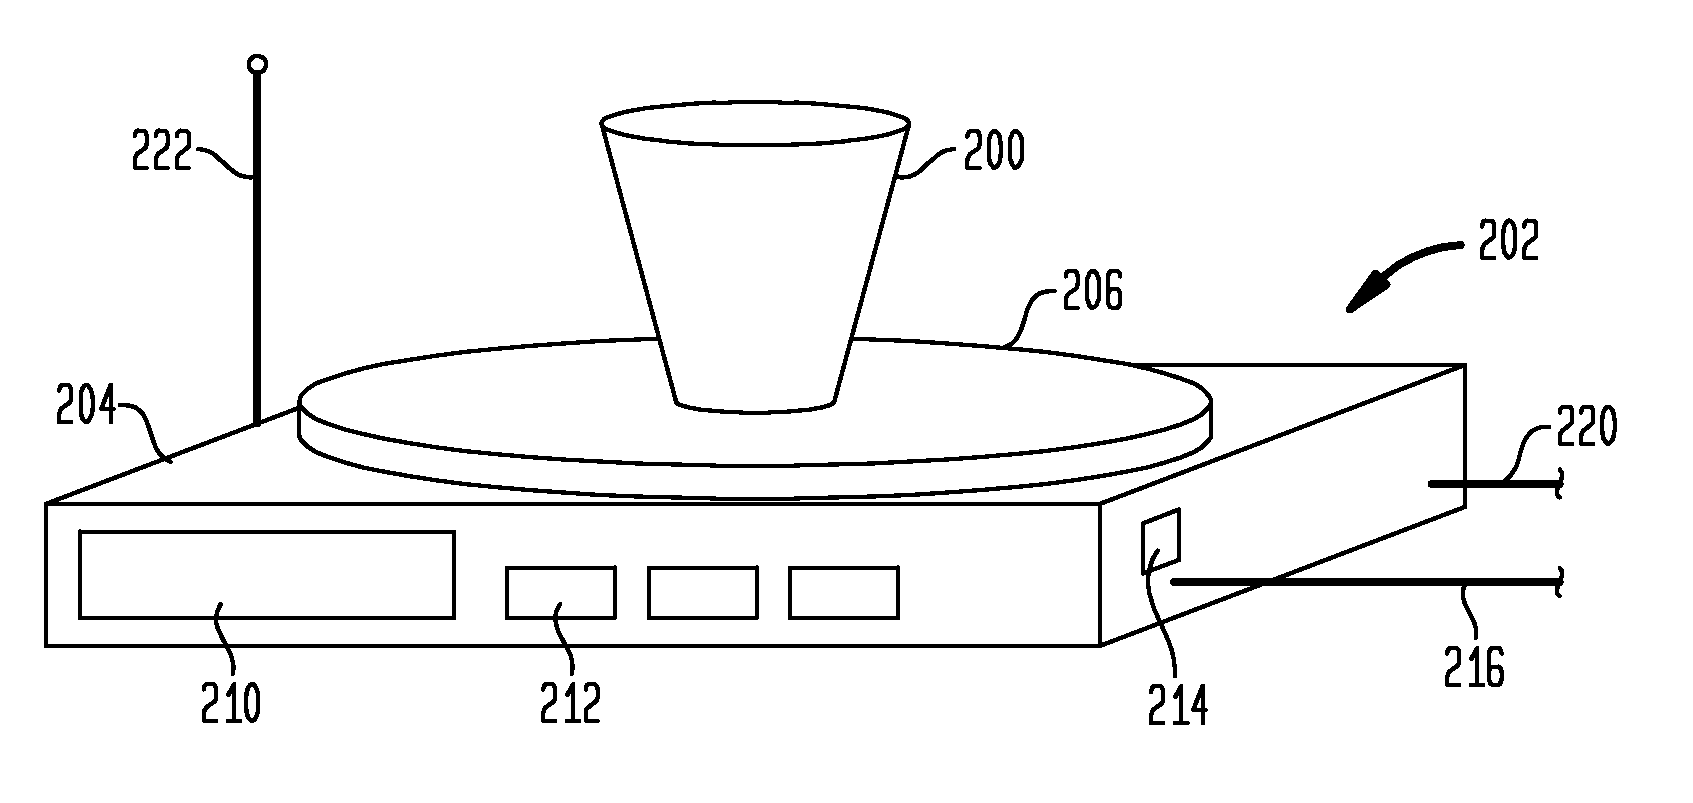 System and Method Using a Scale for Monitoring the Dispensing of a Beverage